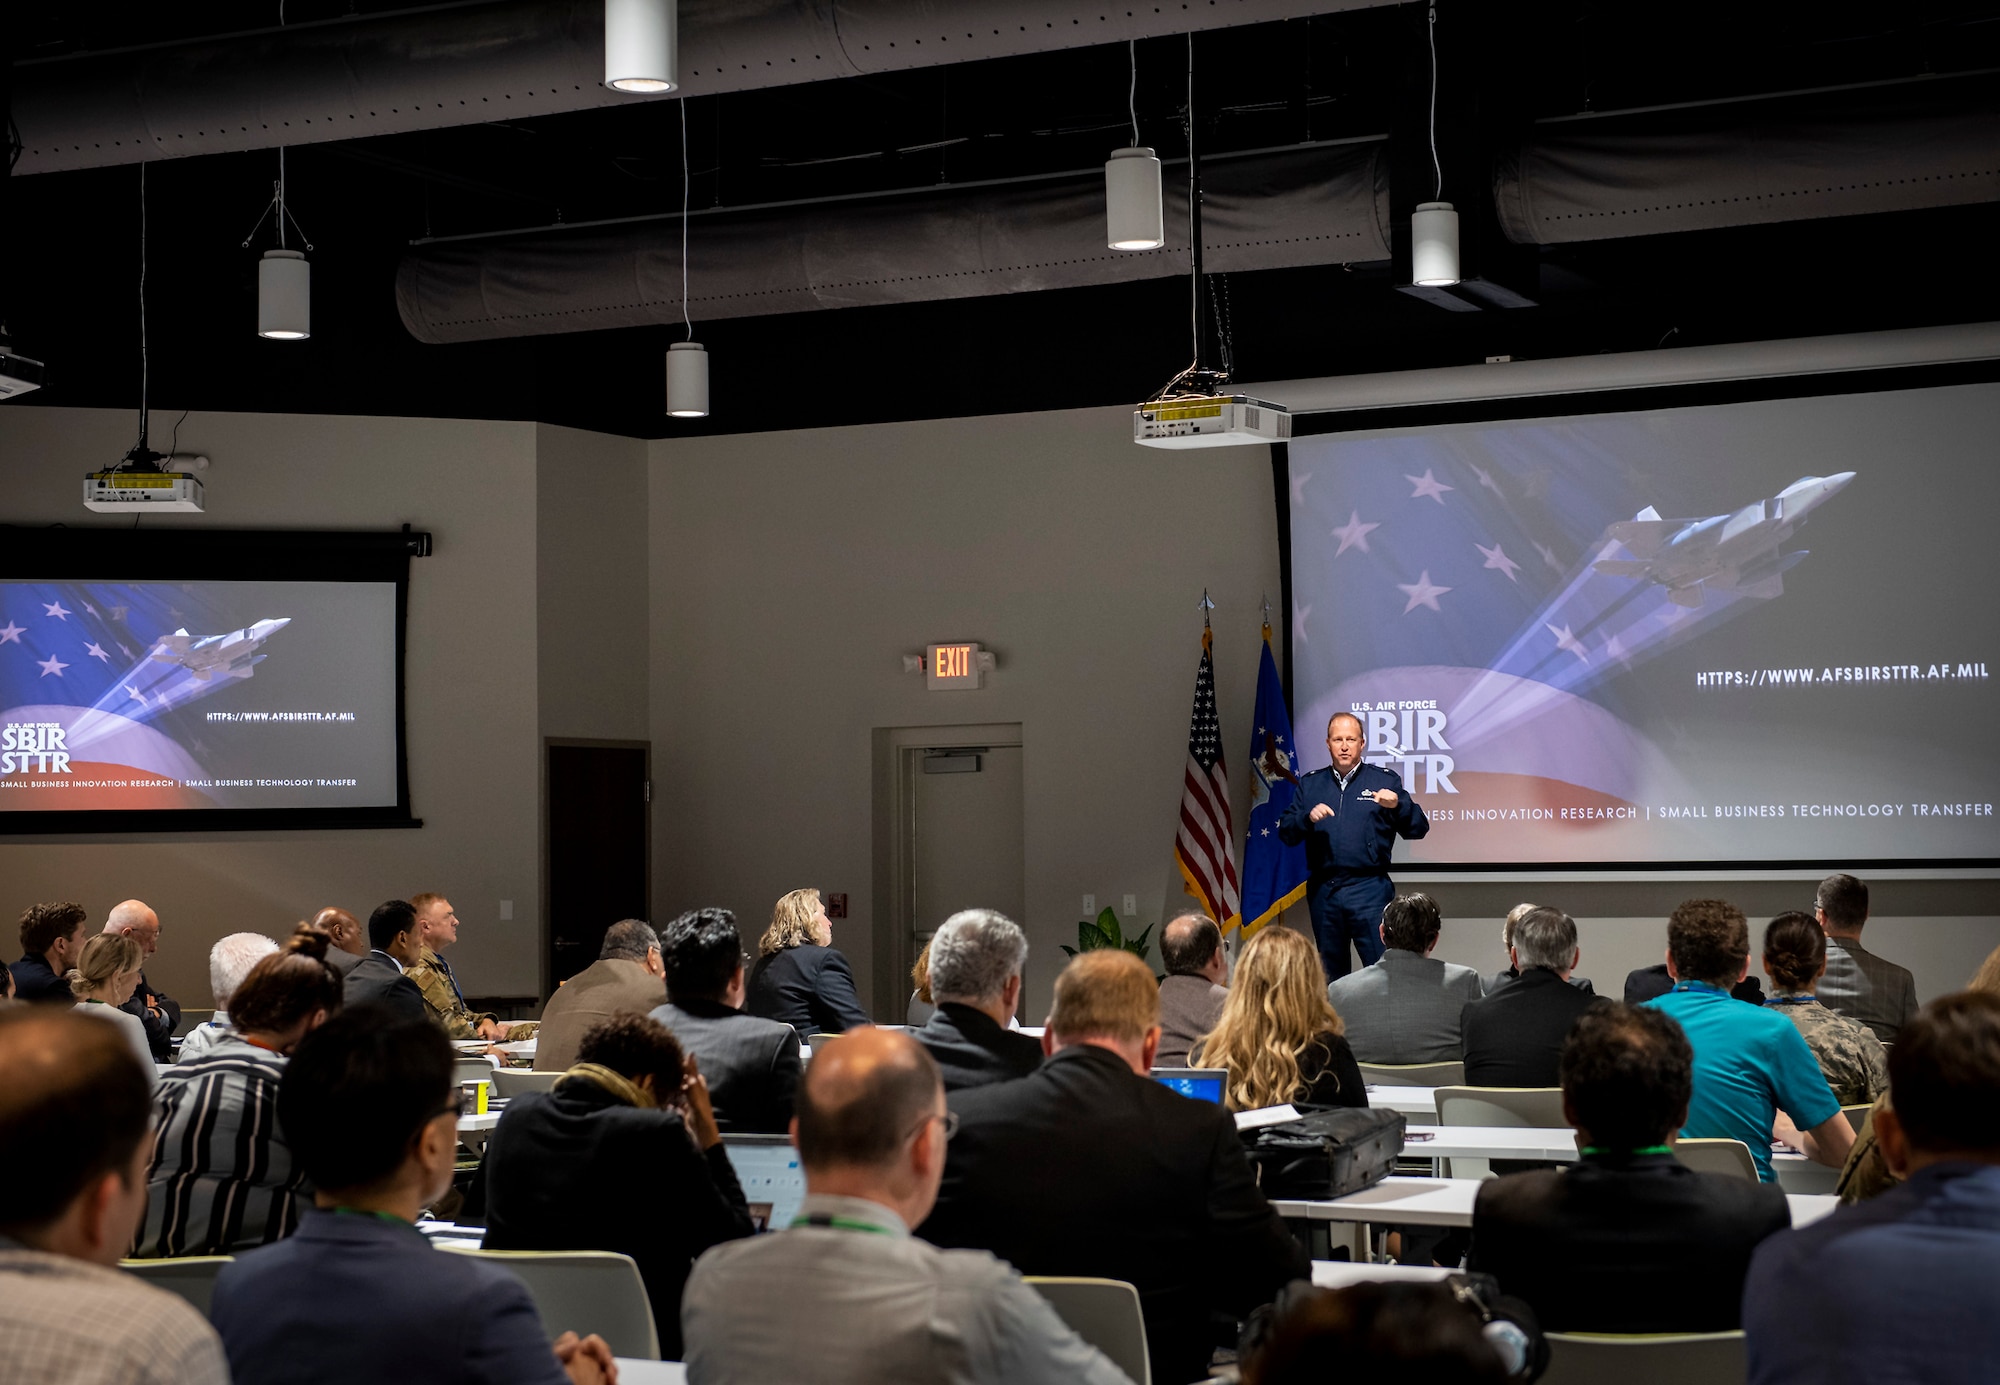 The Air Force holds the first-ever Hypersonics Pitch Day on November 7, 2019 at the Doolittle Institute in Niceville, Florida.The purpose of Air Force “pitch days” is to do business at the speed of ideas by inspiring and accelerating startup and small business creativity toward answering national security challenges.